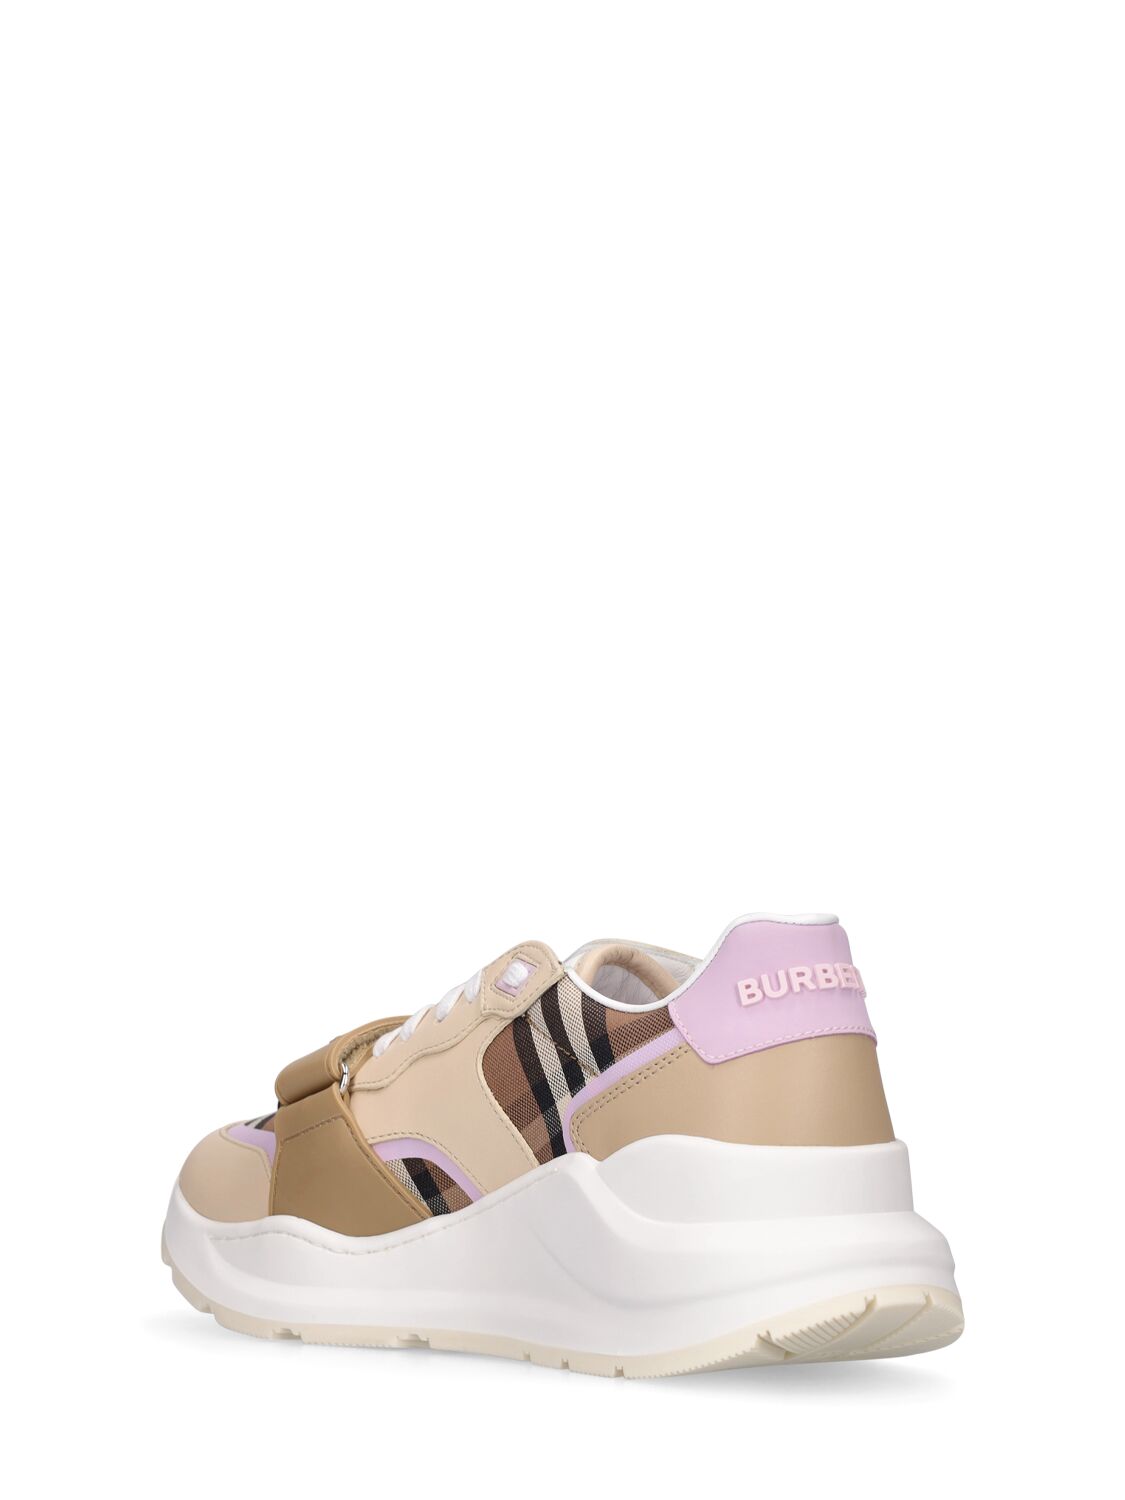 Shop Burberry 30mm Ramsey Canvas & Leather Sneakers In Beige,multi